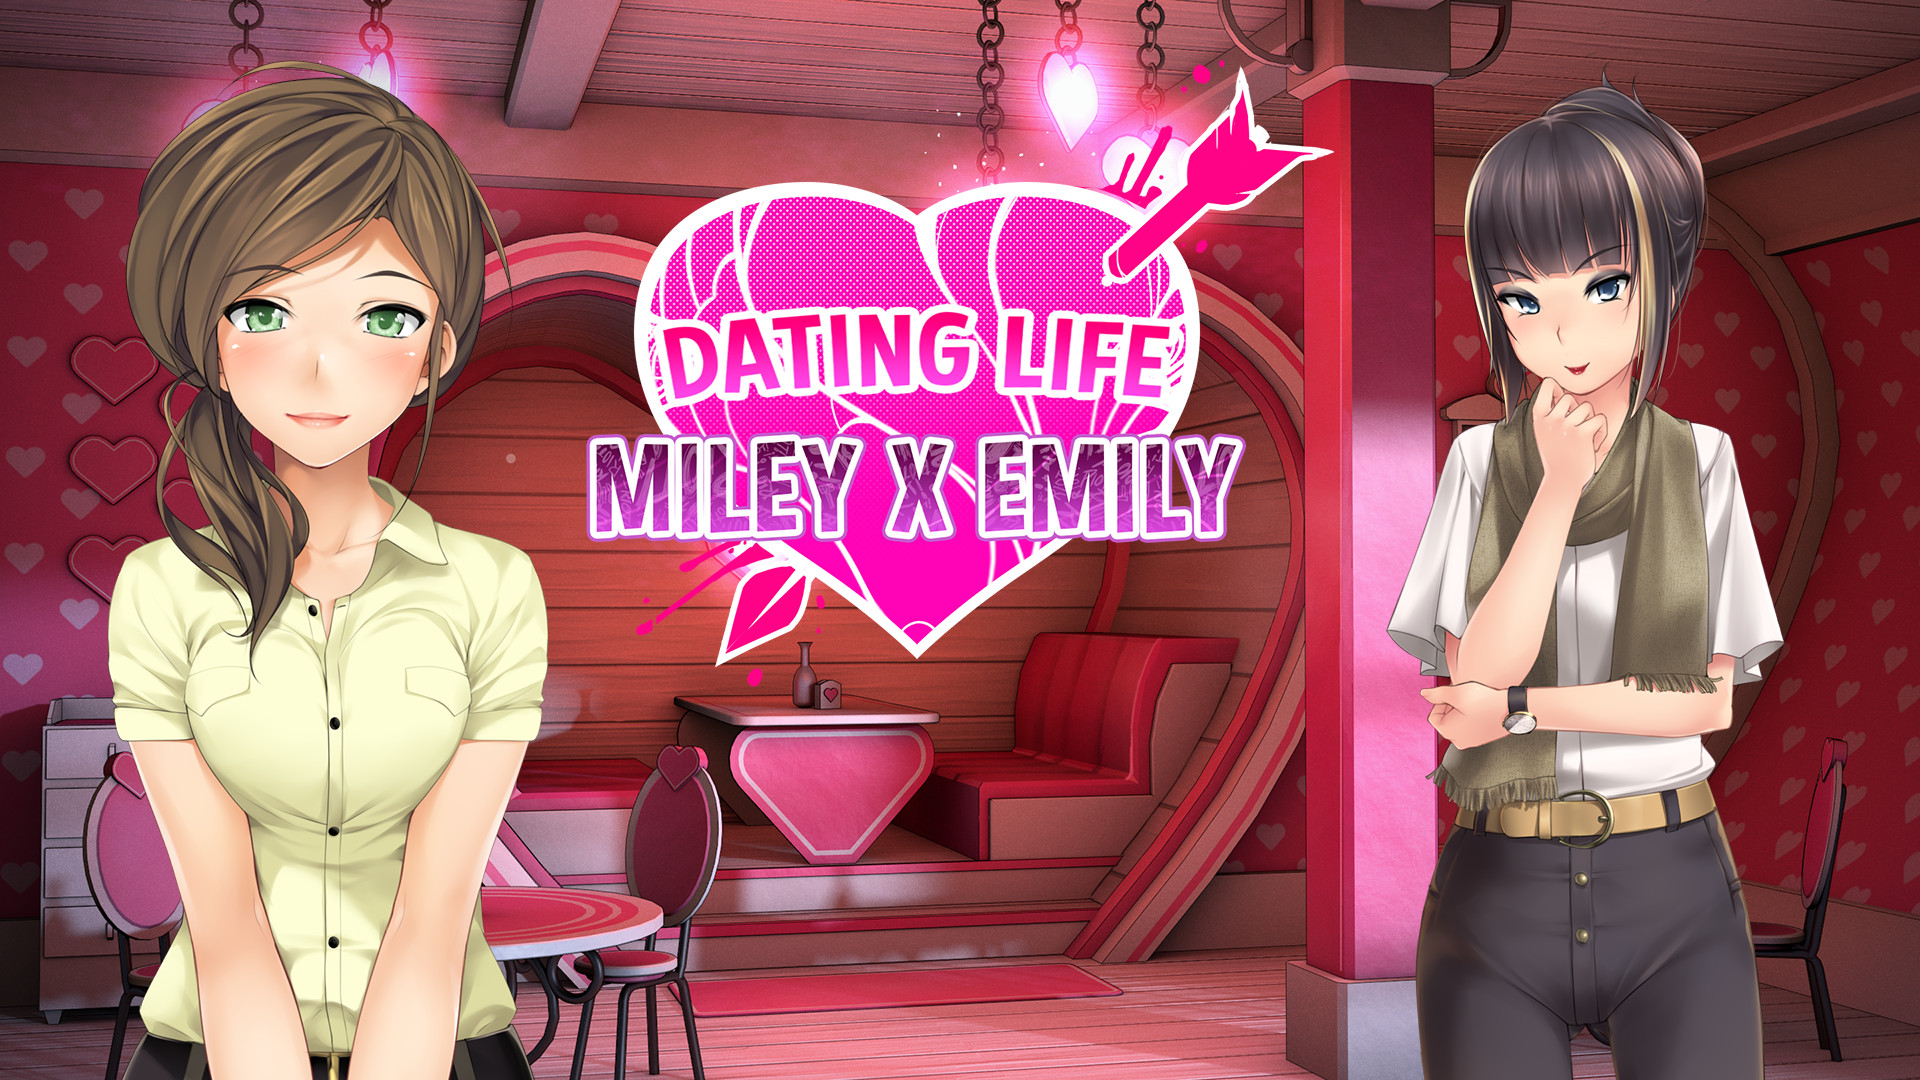 Dating Life: Miley X Emily - Bonus Content & Guide Featured Screenshot #1